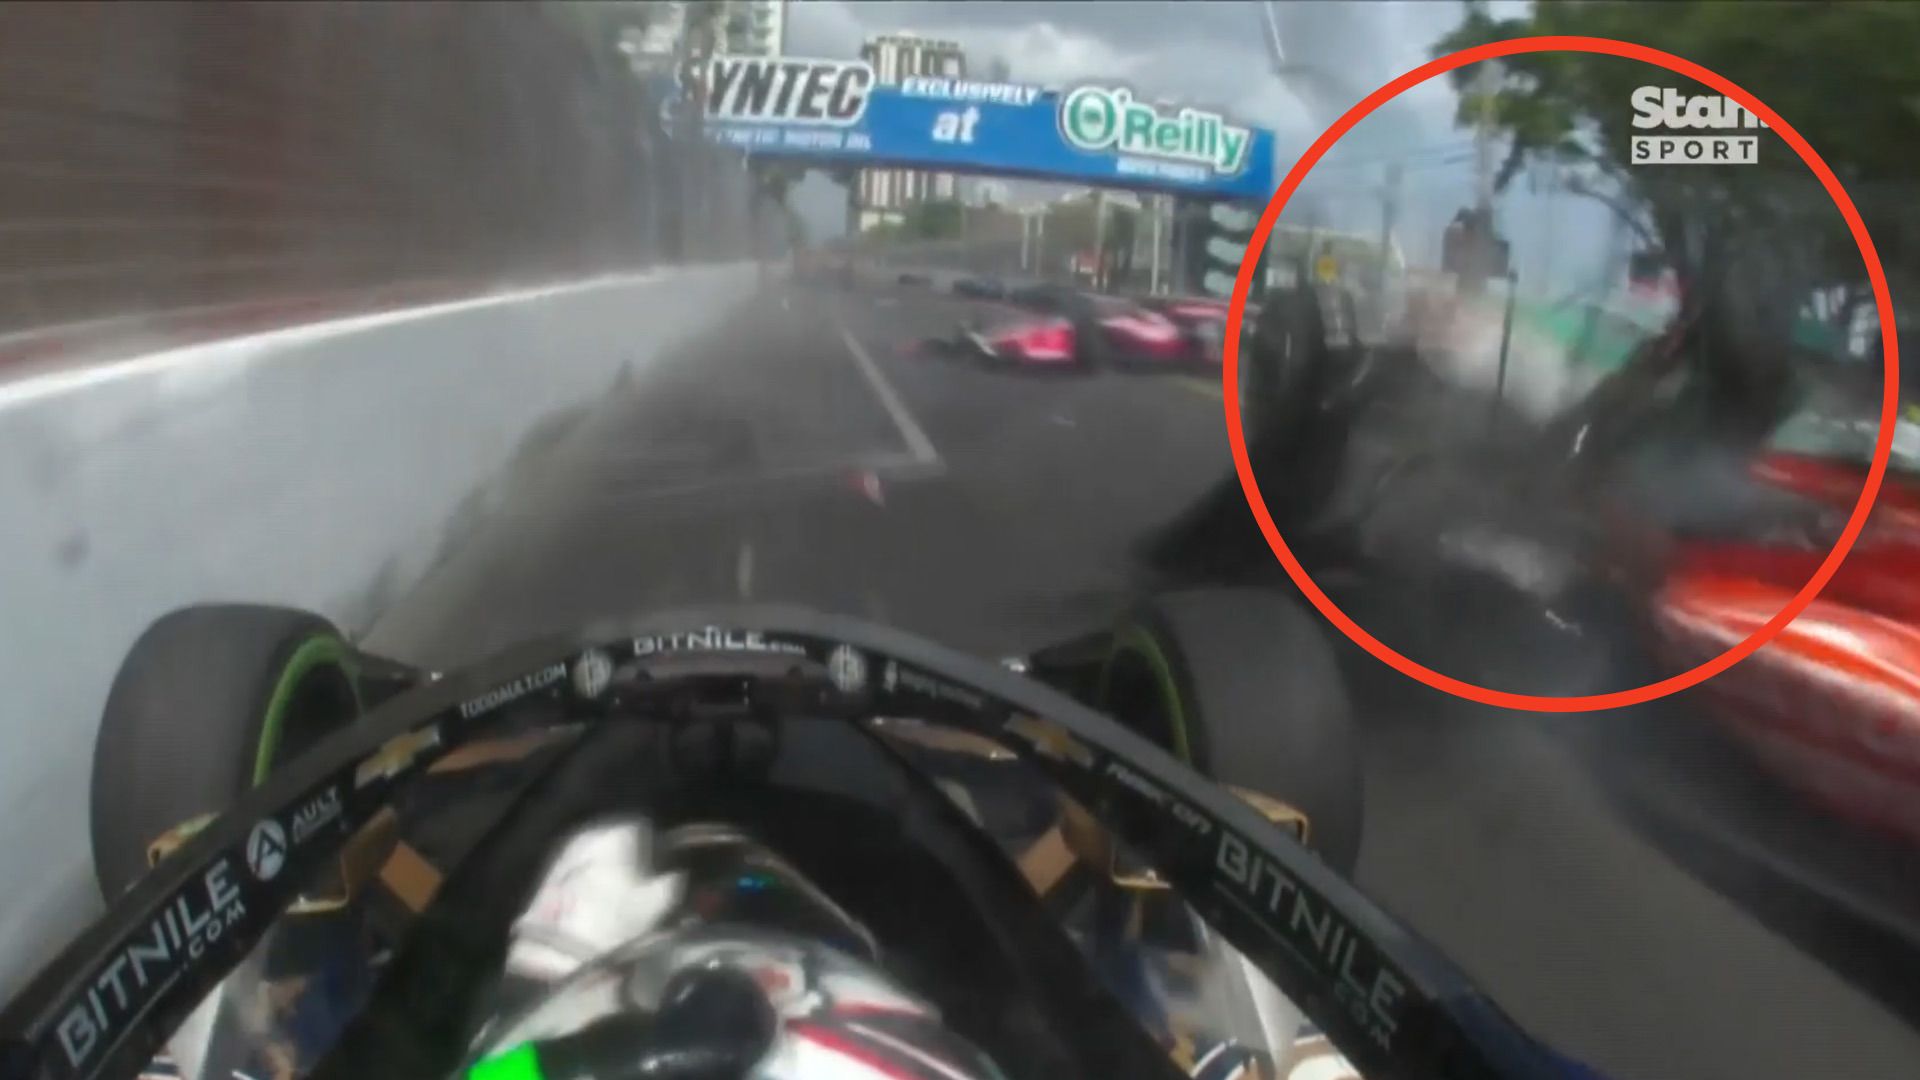 The moment Conor Daly squeezed between the concrete wall and the high-flying car of Devlin DeFrancesco.